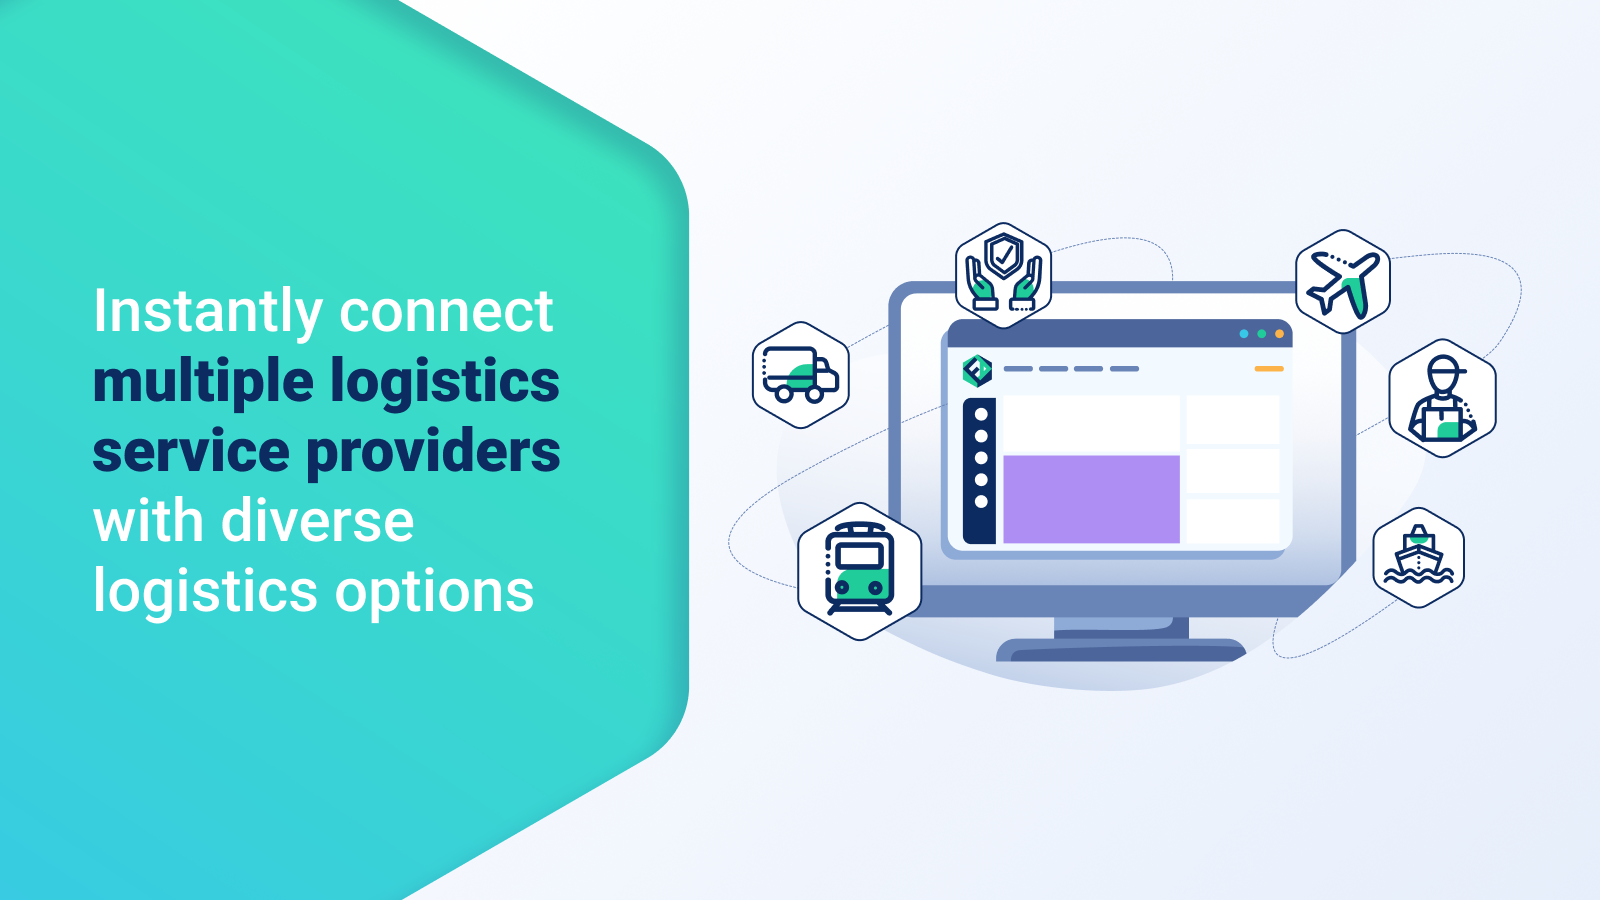 Connect multiple logistics service providers instantly